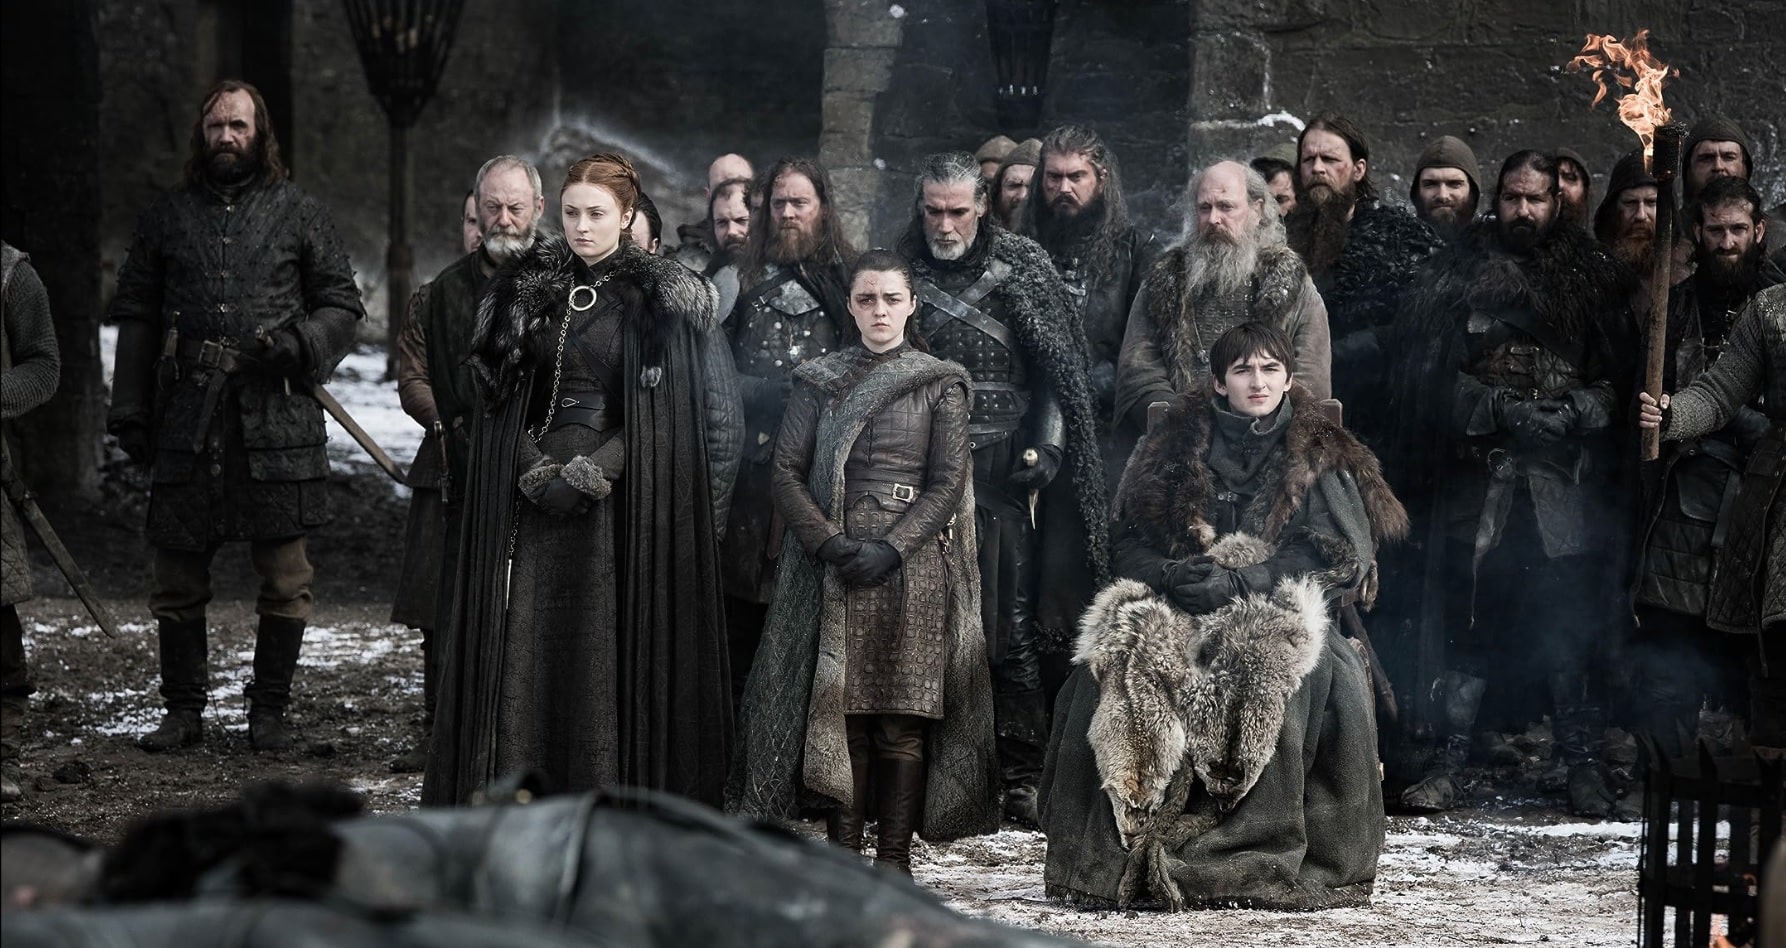 Liam Cunningham, Rory McCann, Maisie Williams, Isaac Hempstead Wright, and Sophie Turner in Game of Thrones (2011)